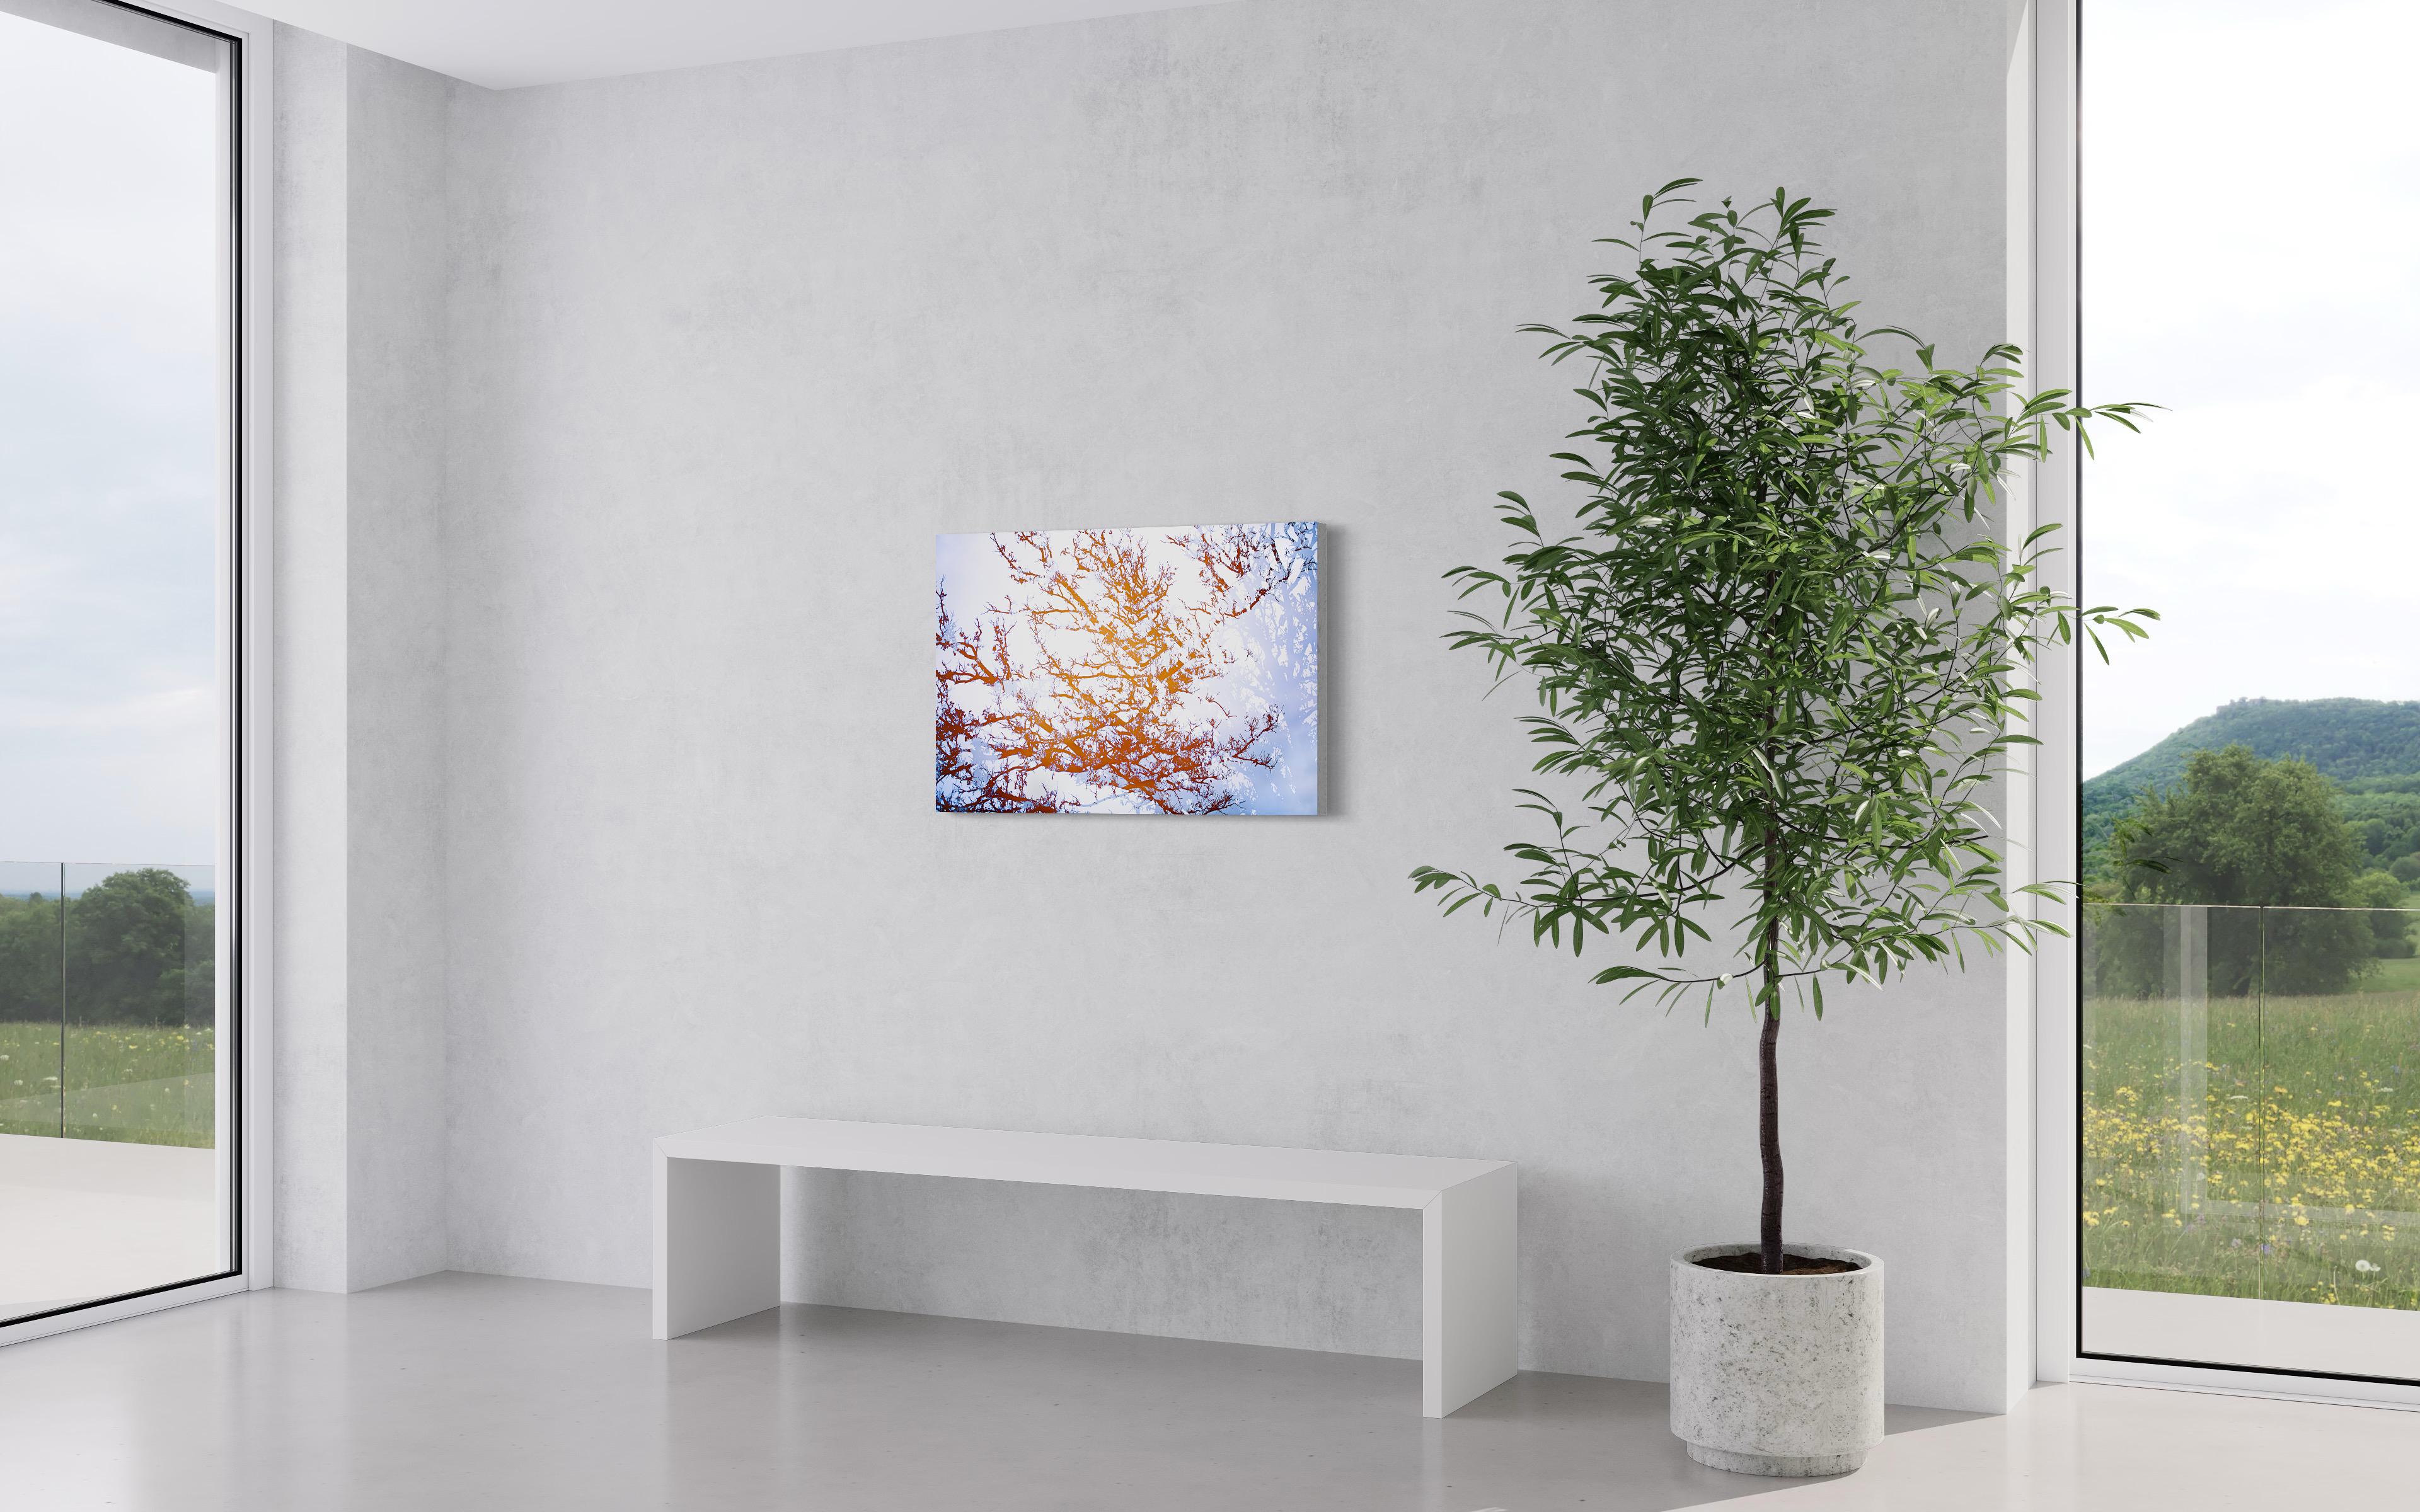 This contemporary photograph by Tori Gagne captures an abstracted view of tree branches, with a contrasting palette of light blue-lavender and warm, deep orange. An edition size of 50, this photograph is available as a metal sublimation print with a